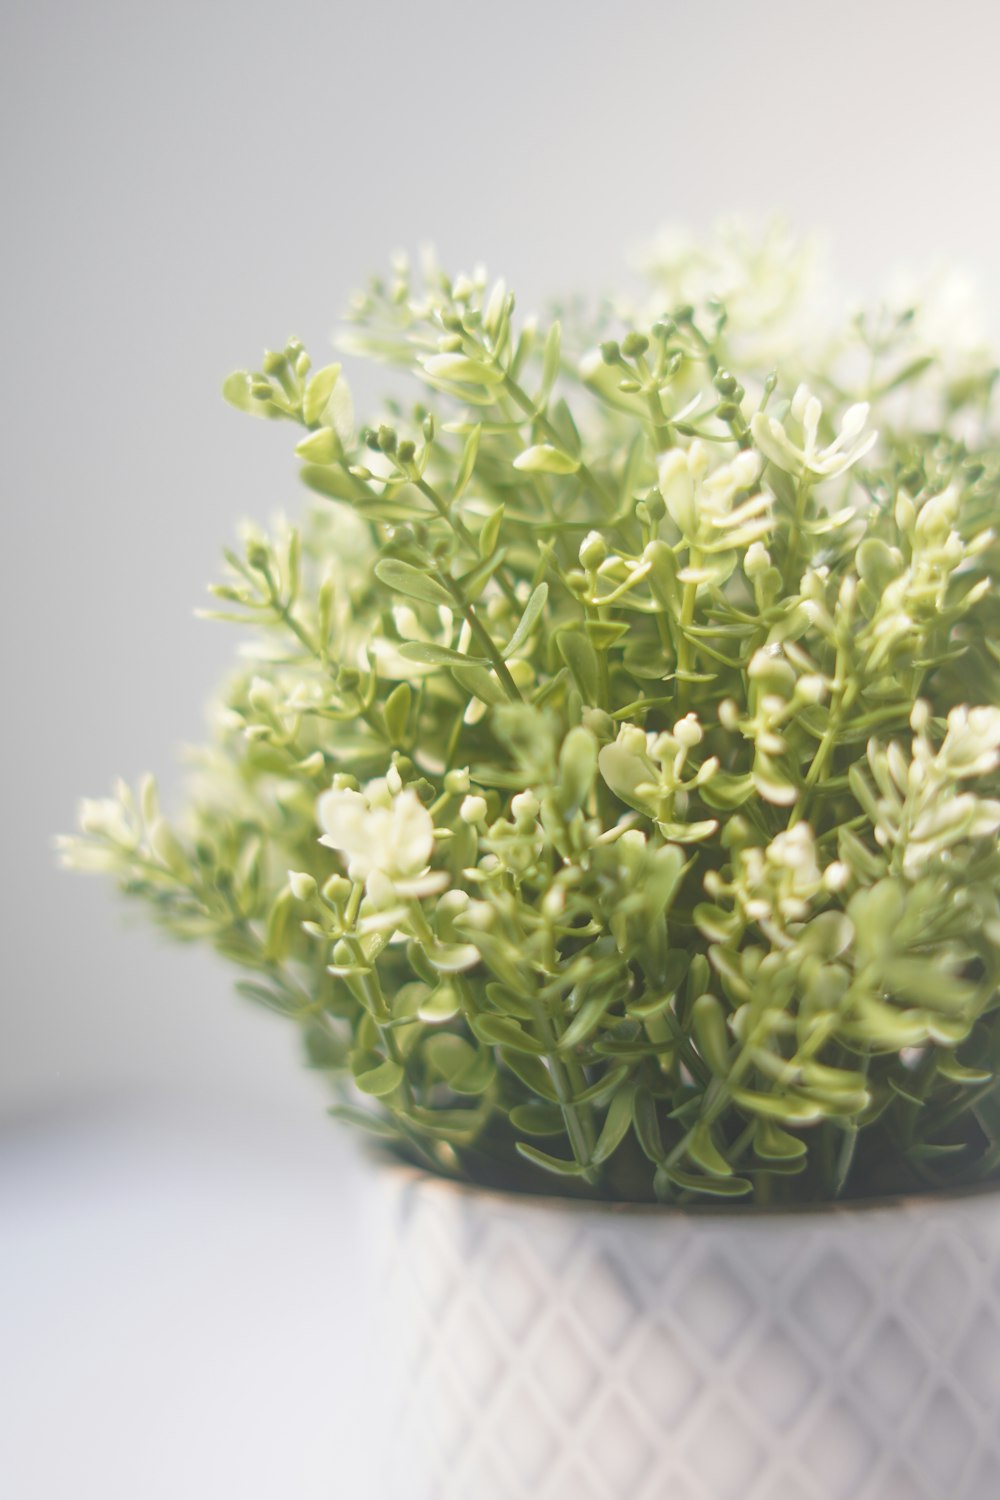 a close up of a plant in a vase